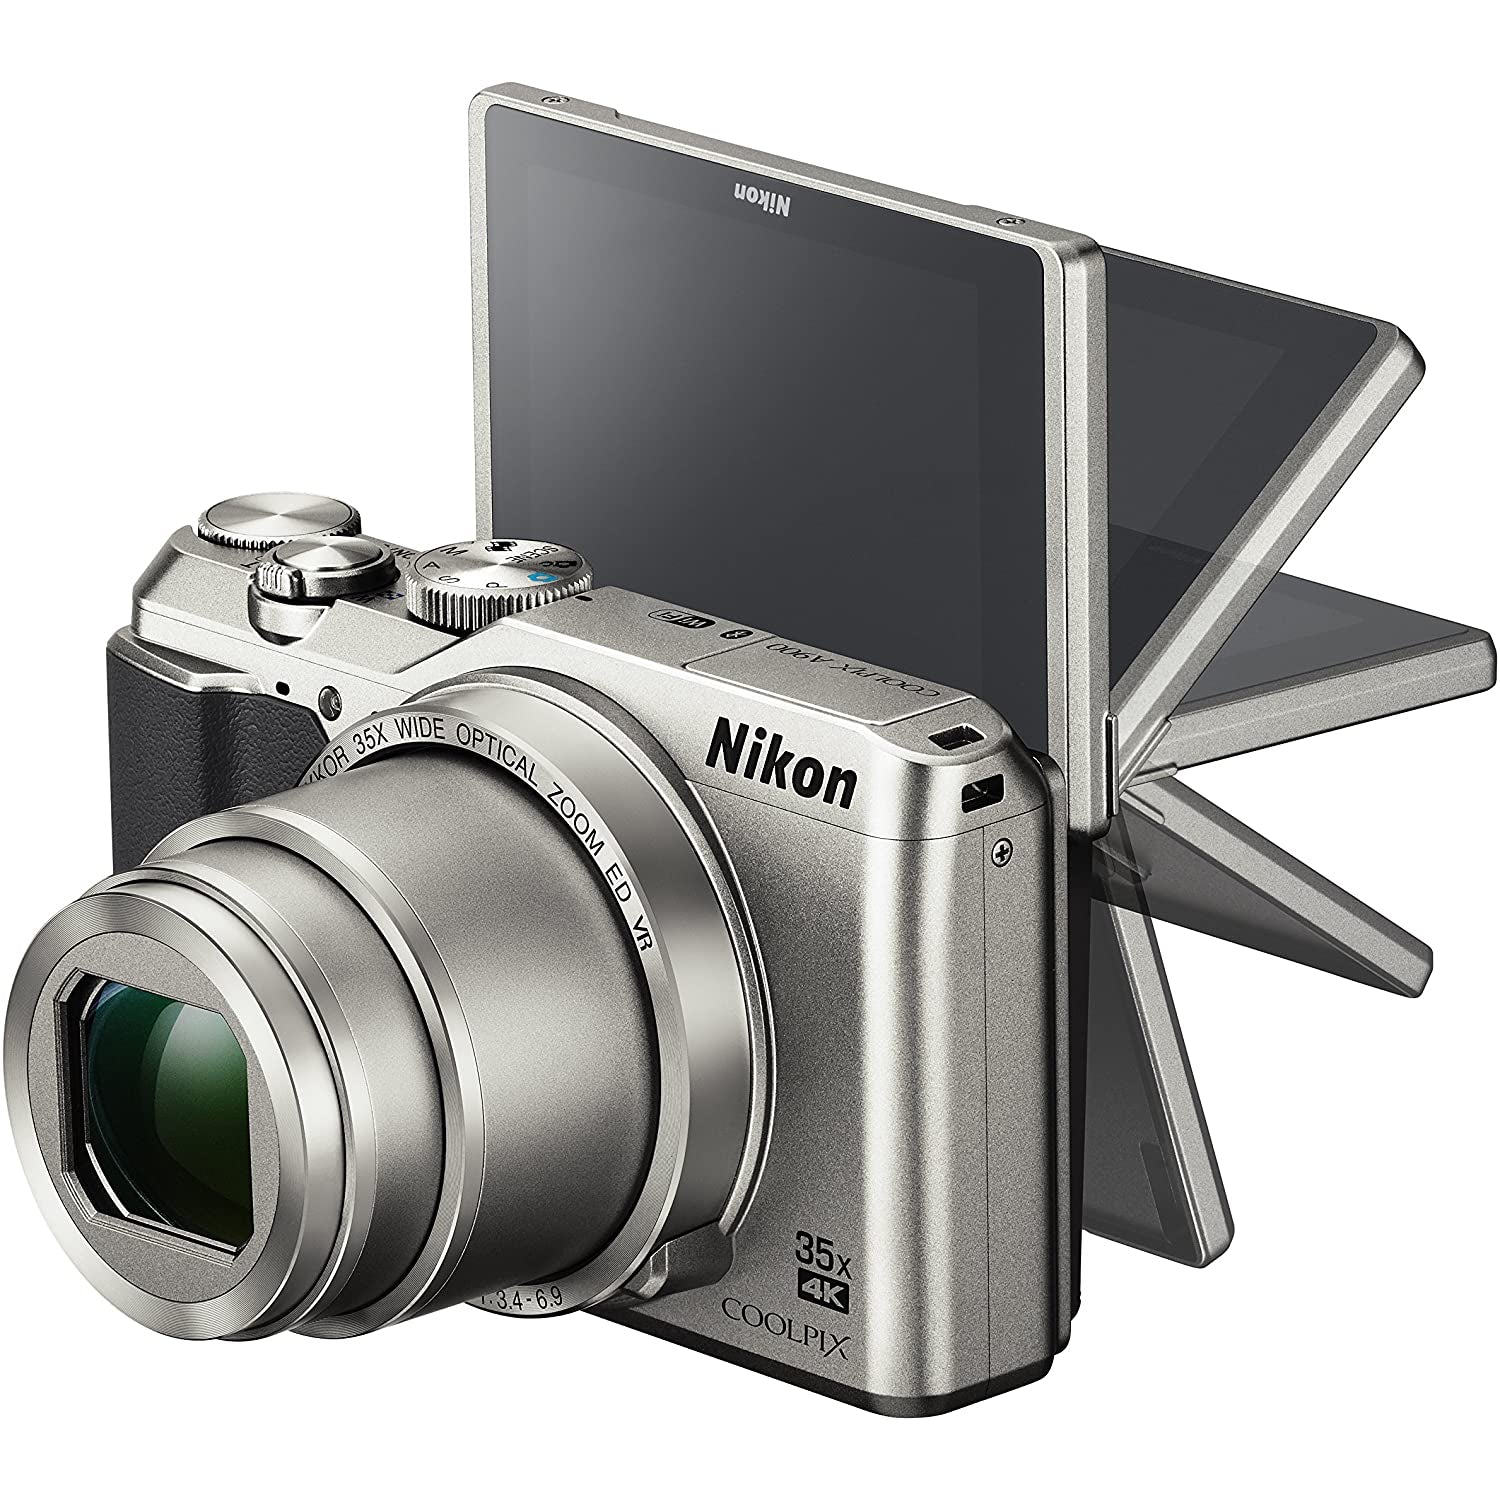 Nikon Coolpix A900 Compact System Camera - Silver | Stock Must Go